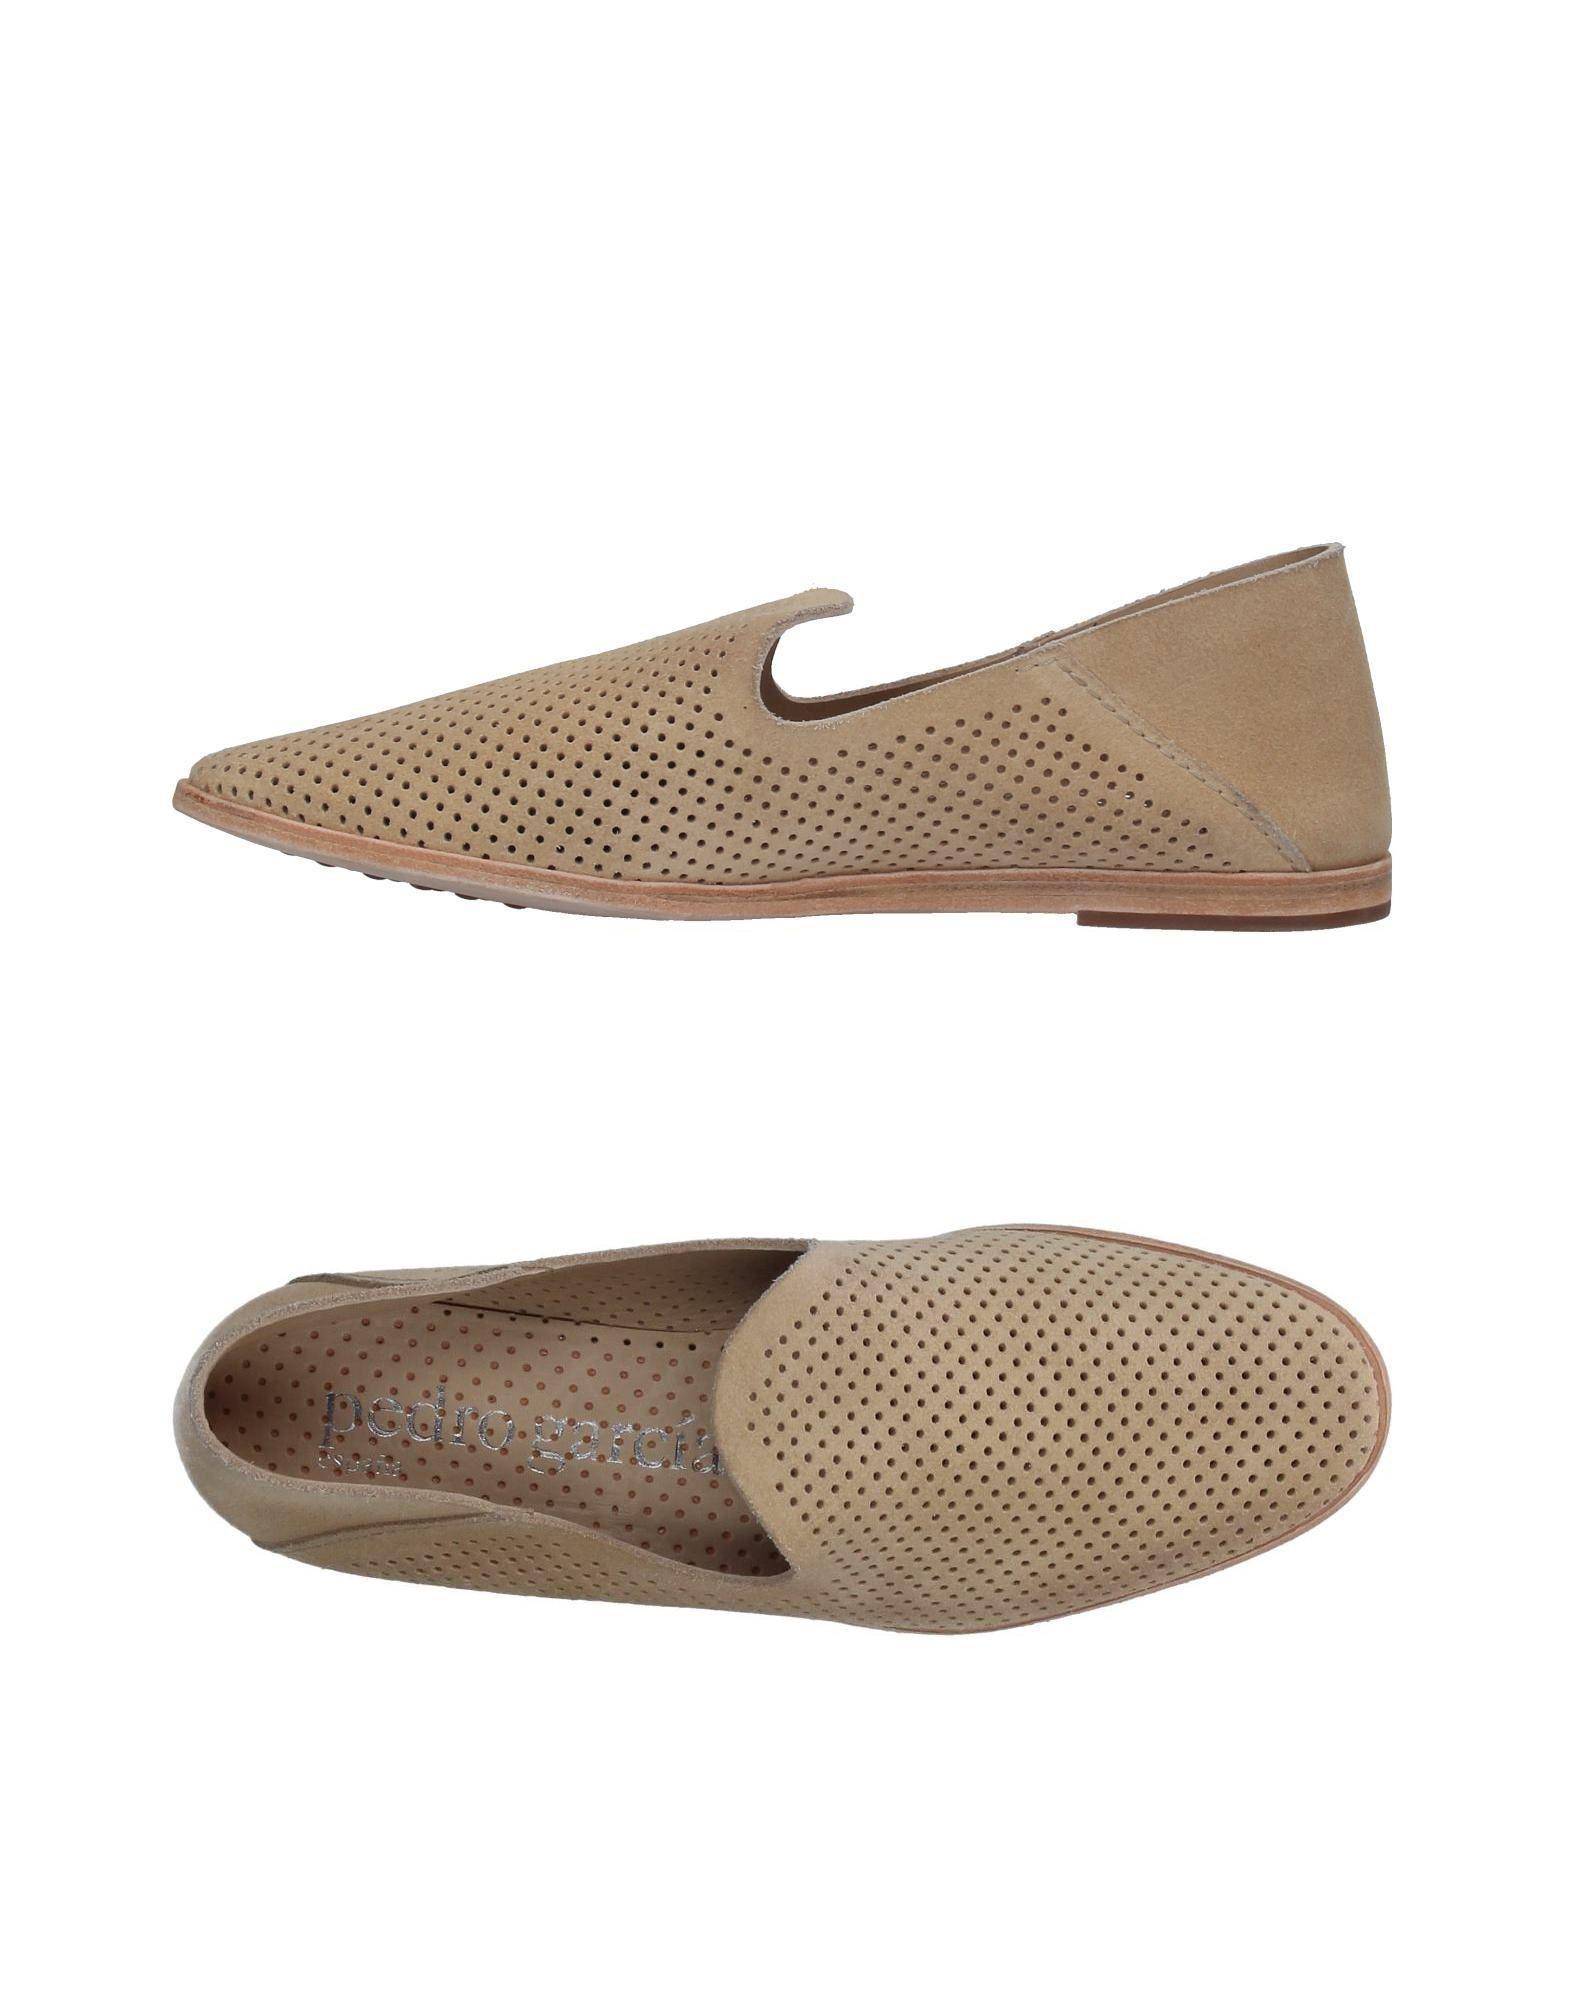 Lyst - Pedro Garcia Loafer in Natural